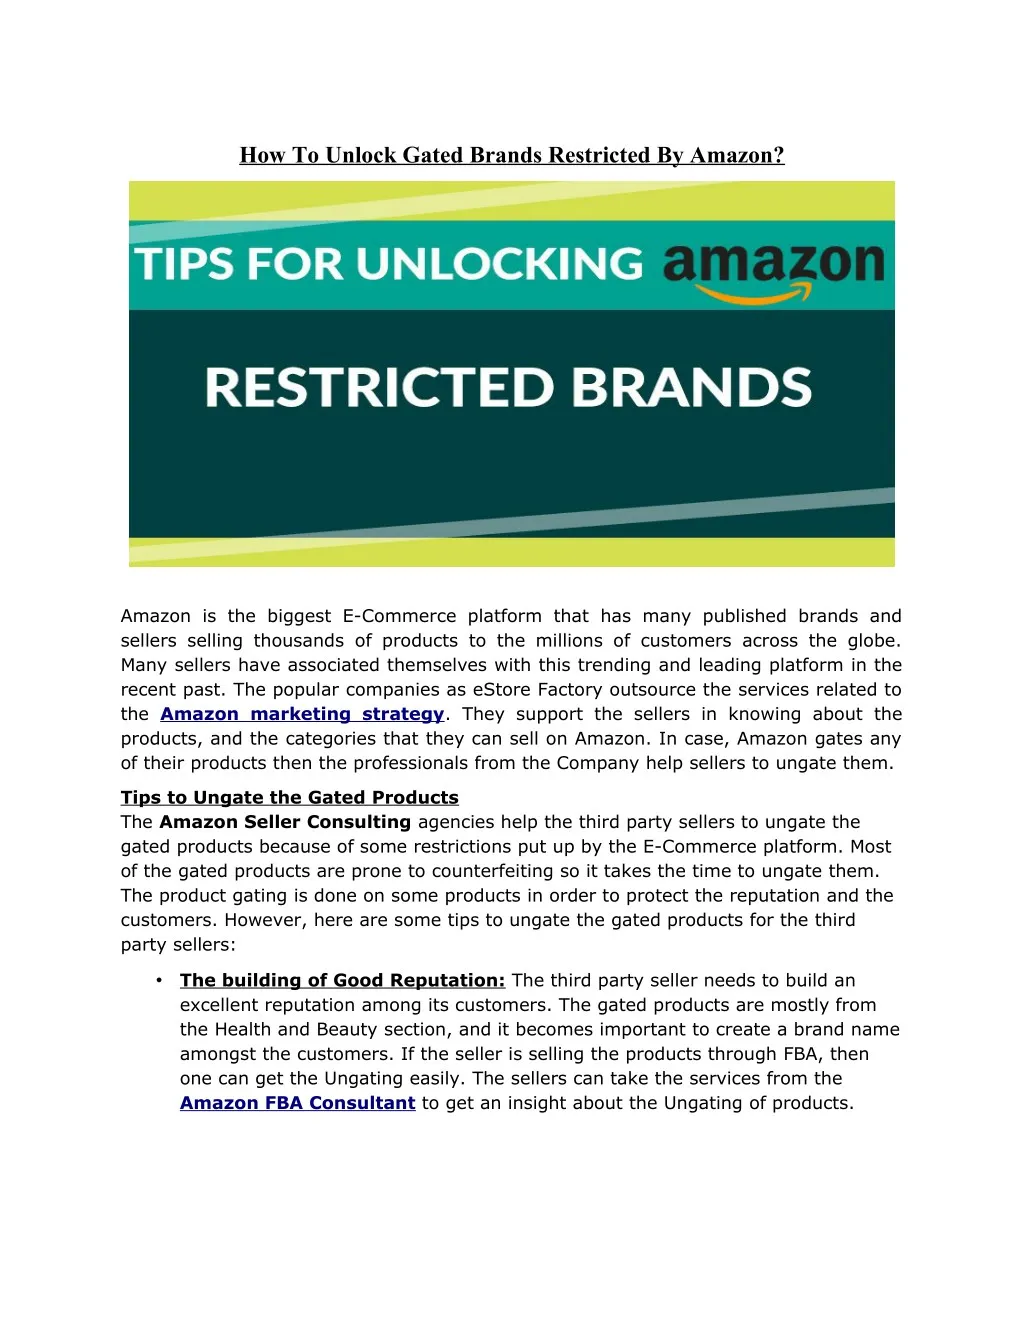 how to unlock gated brands restricted by amazon